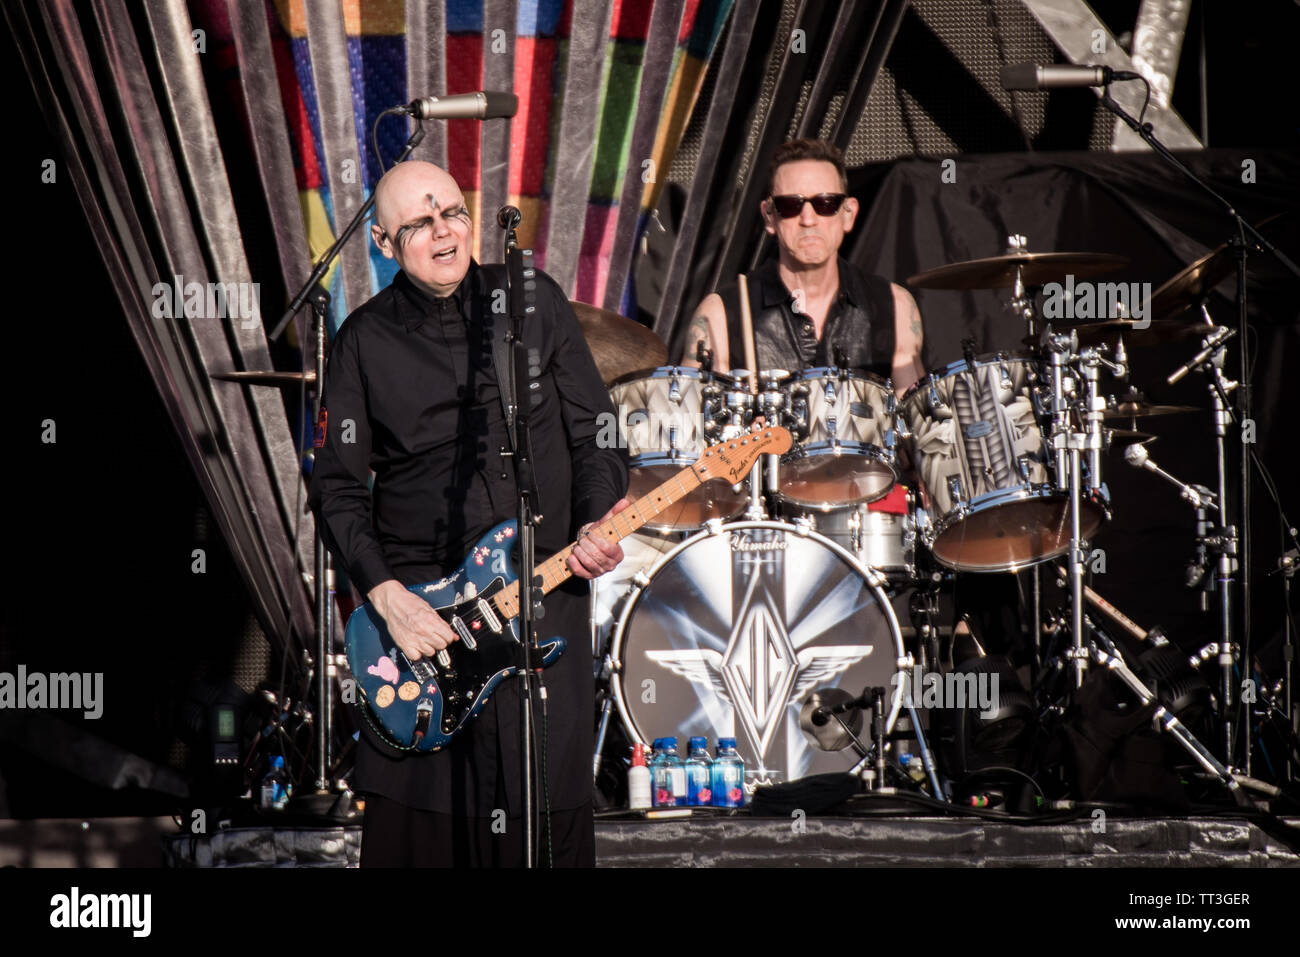 Billy Corgan and Jimmy Chamberlin of the American rock band Smashing Pumpkins, performing live on stage at the Firenze Rocks festival 2019 in Florence Stock Photo